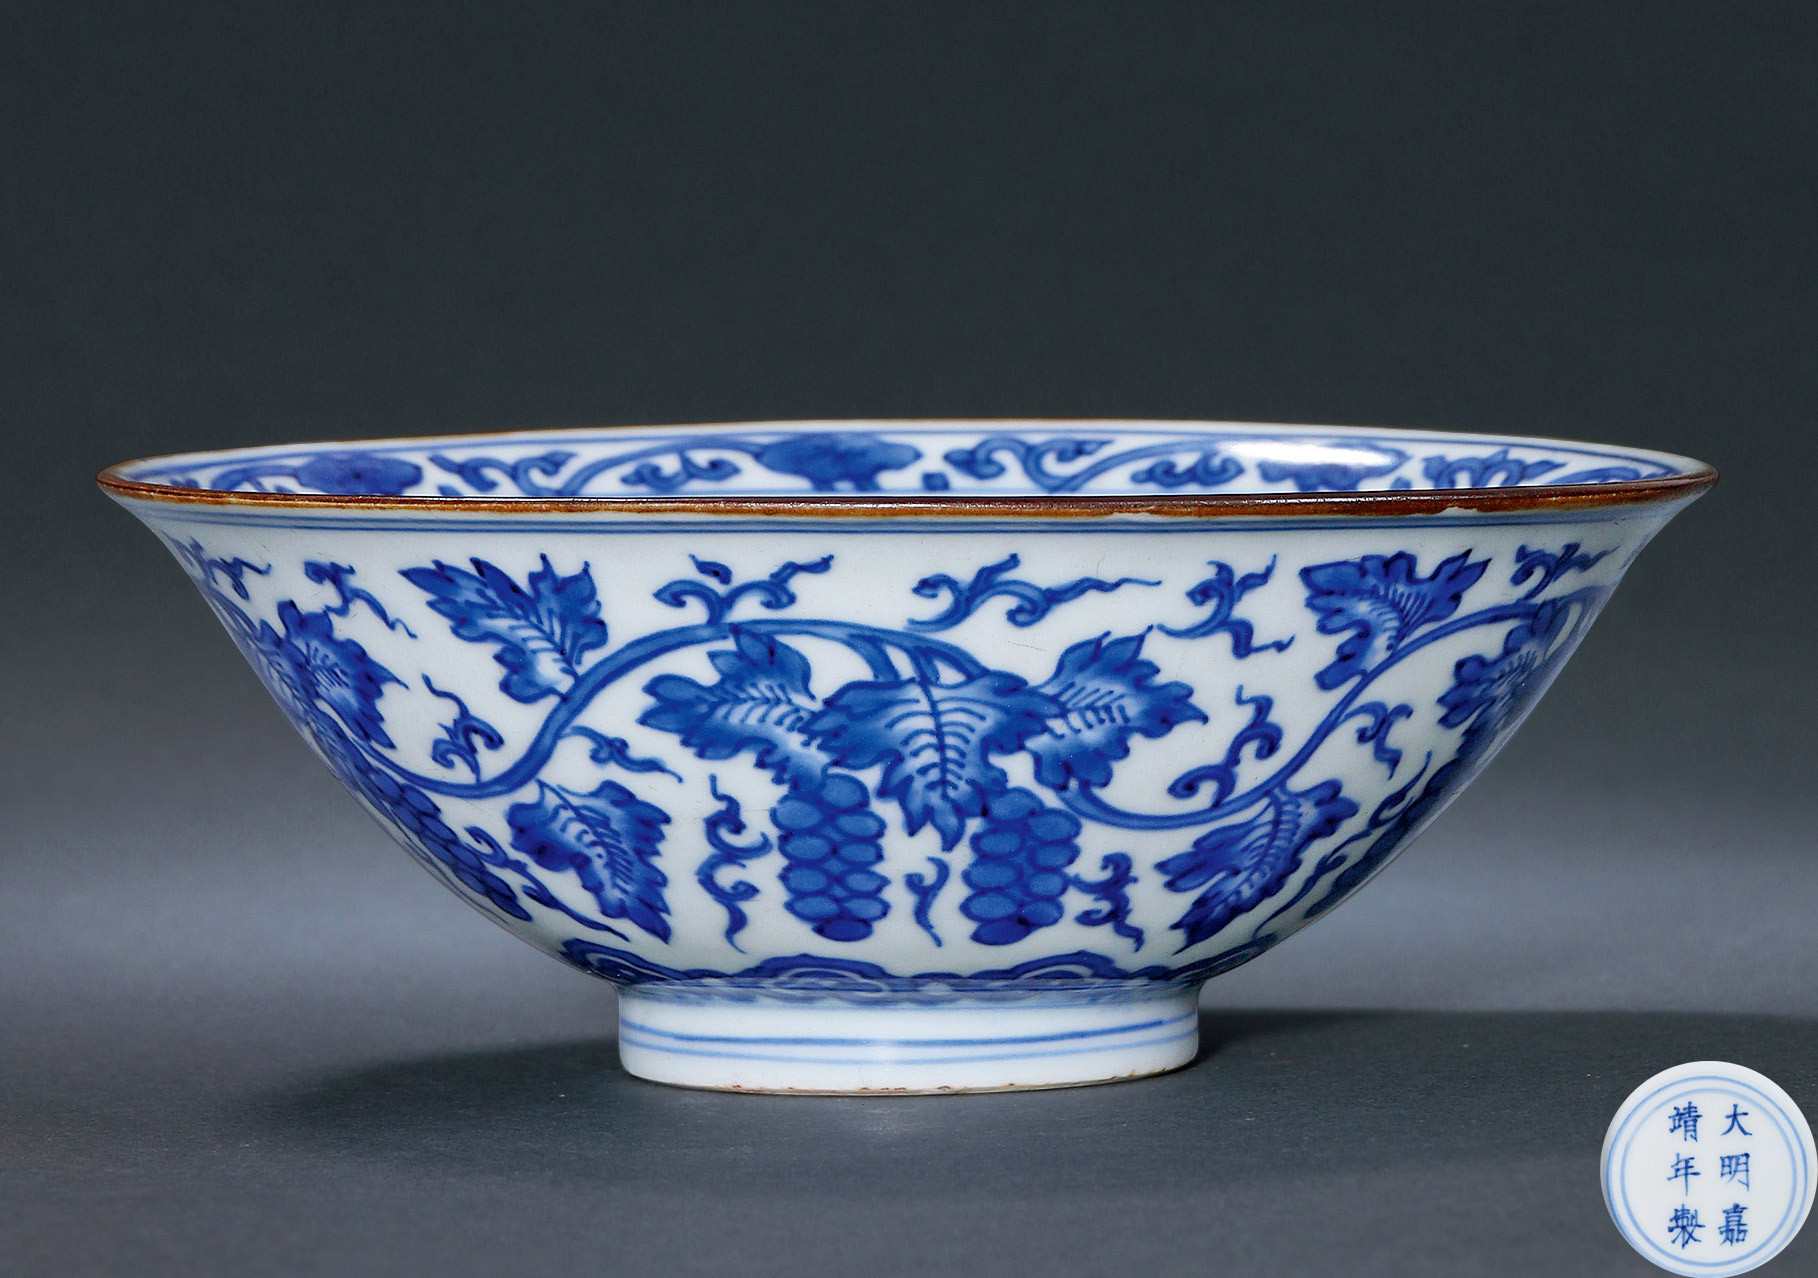 A BLUE AND WHITE BOWL WITH GRAPE DESIGN